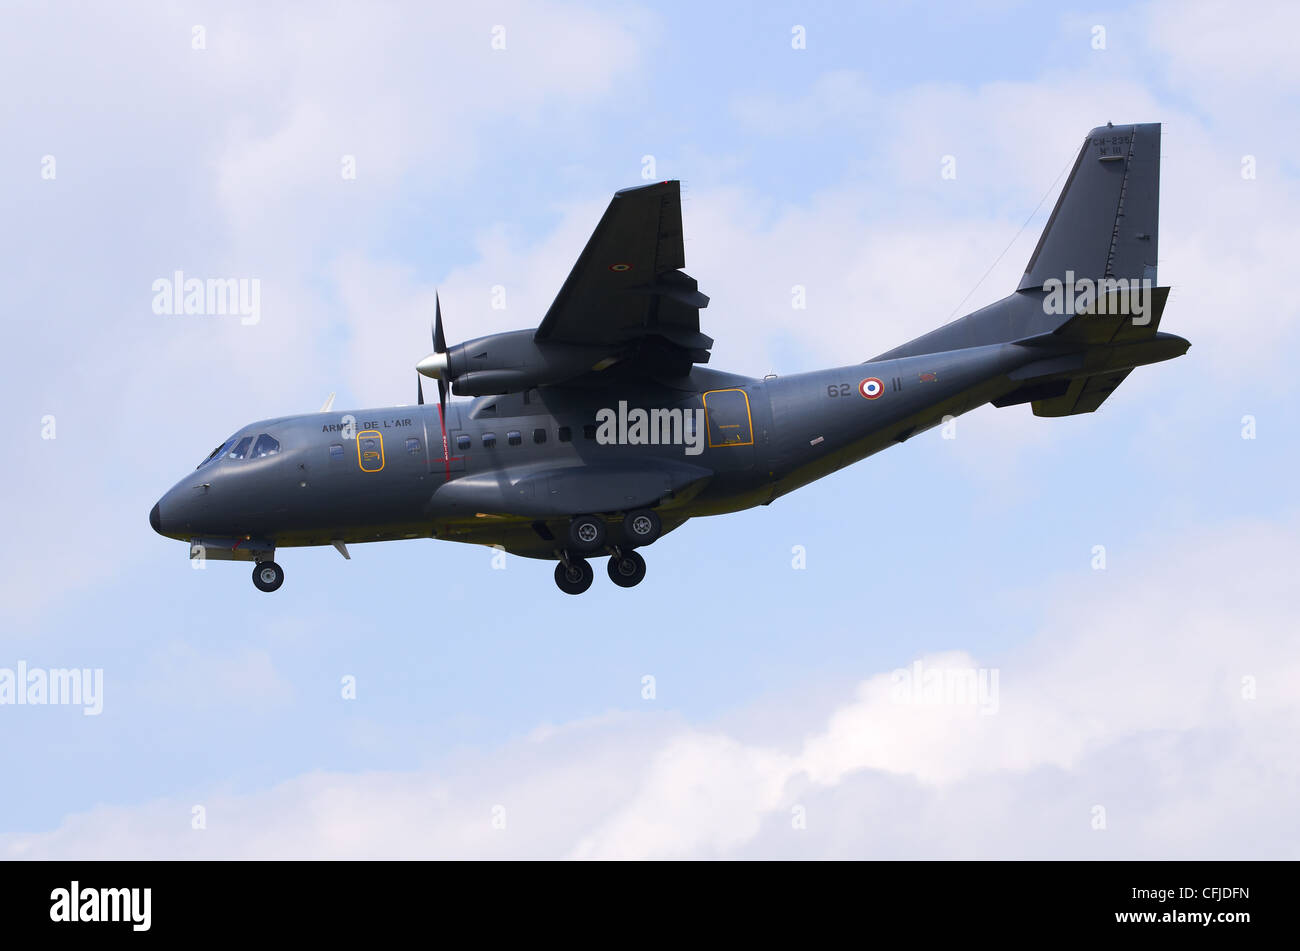 CASA CN-235 200M operated by the French Air Force Armee de L'air on final approach for landing at RAF Fairford, UK Stock Photo